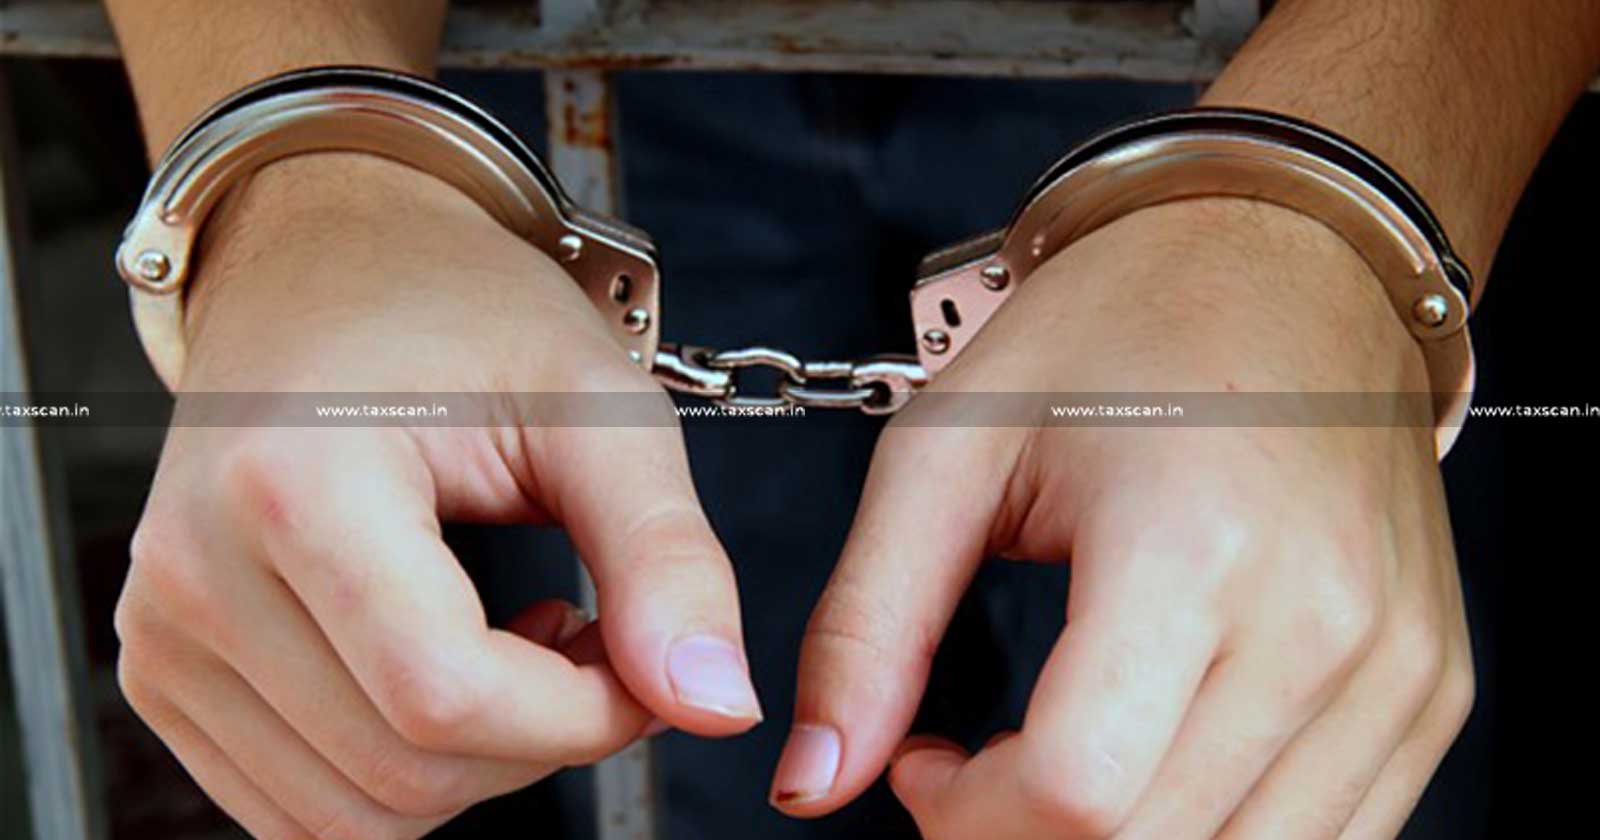 SFIO Arrests Chartered Accountant in Hyderabad - SFIO Arrests - Non-compliance - Chartered Accountant - Summons - taxscan